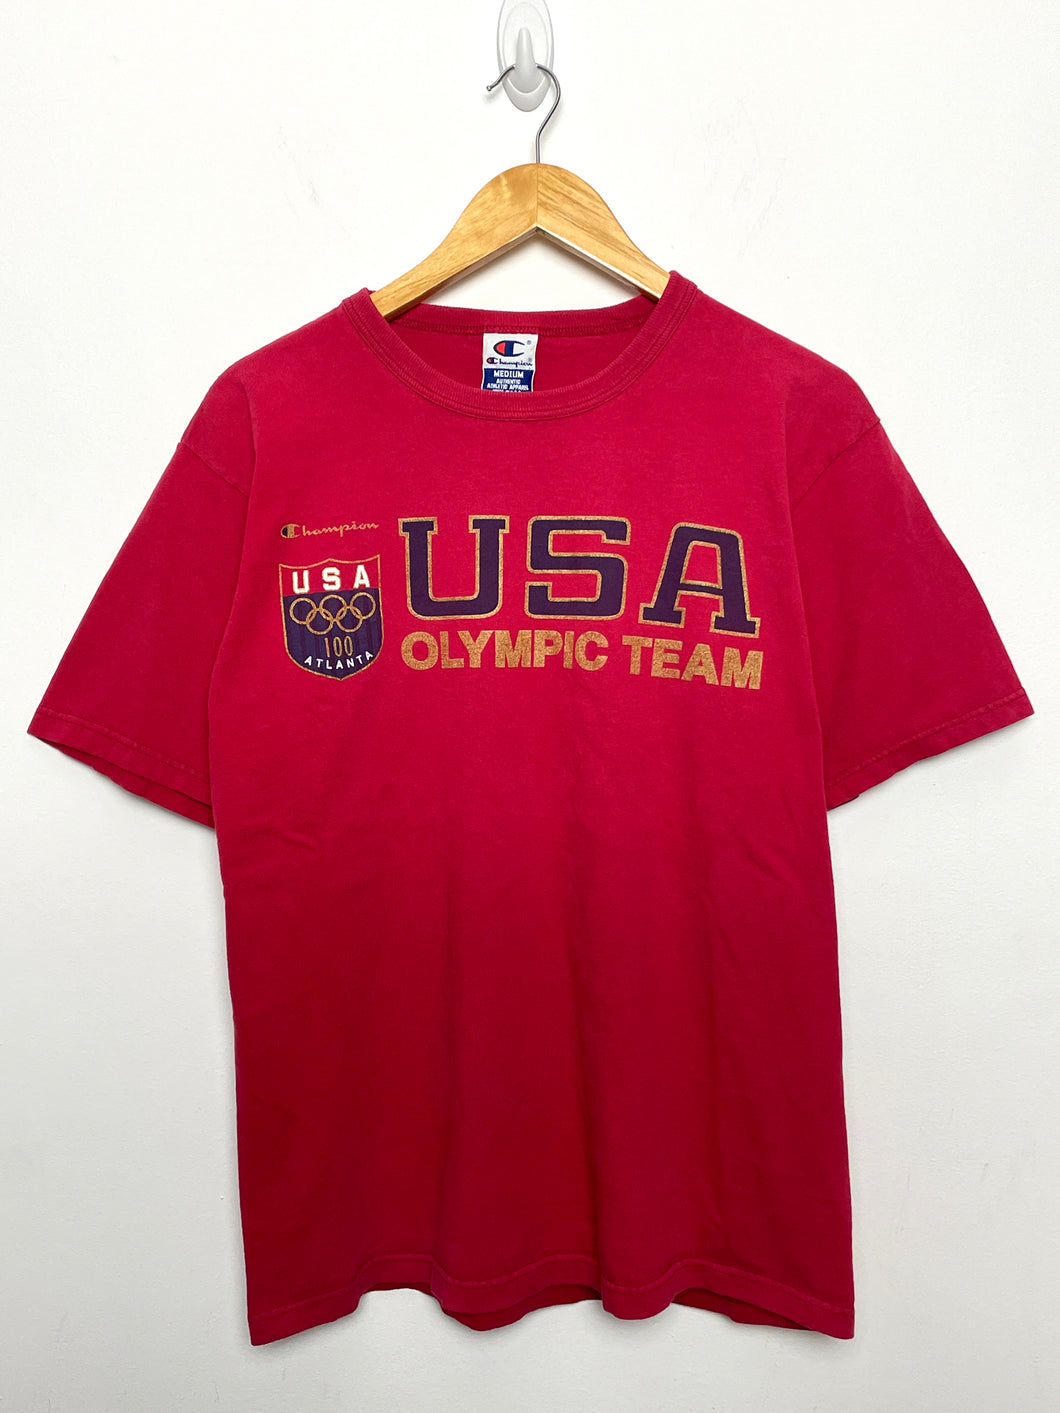 Vintage 1990s Champion USA Olympic Team Spell Out Graphic Tee Shirt (size adult Medium)